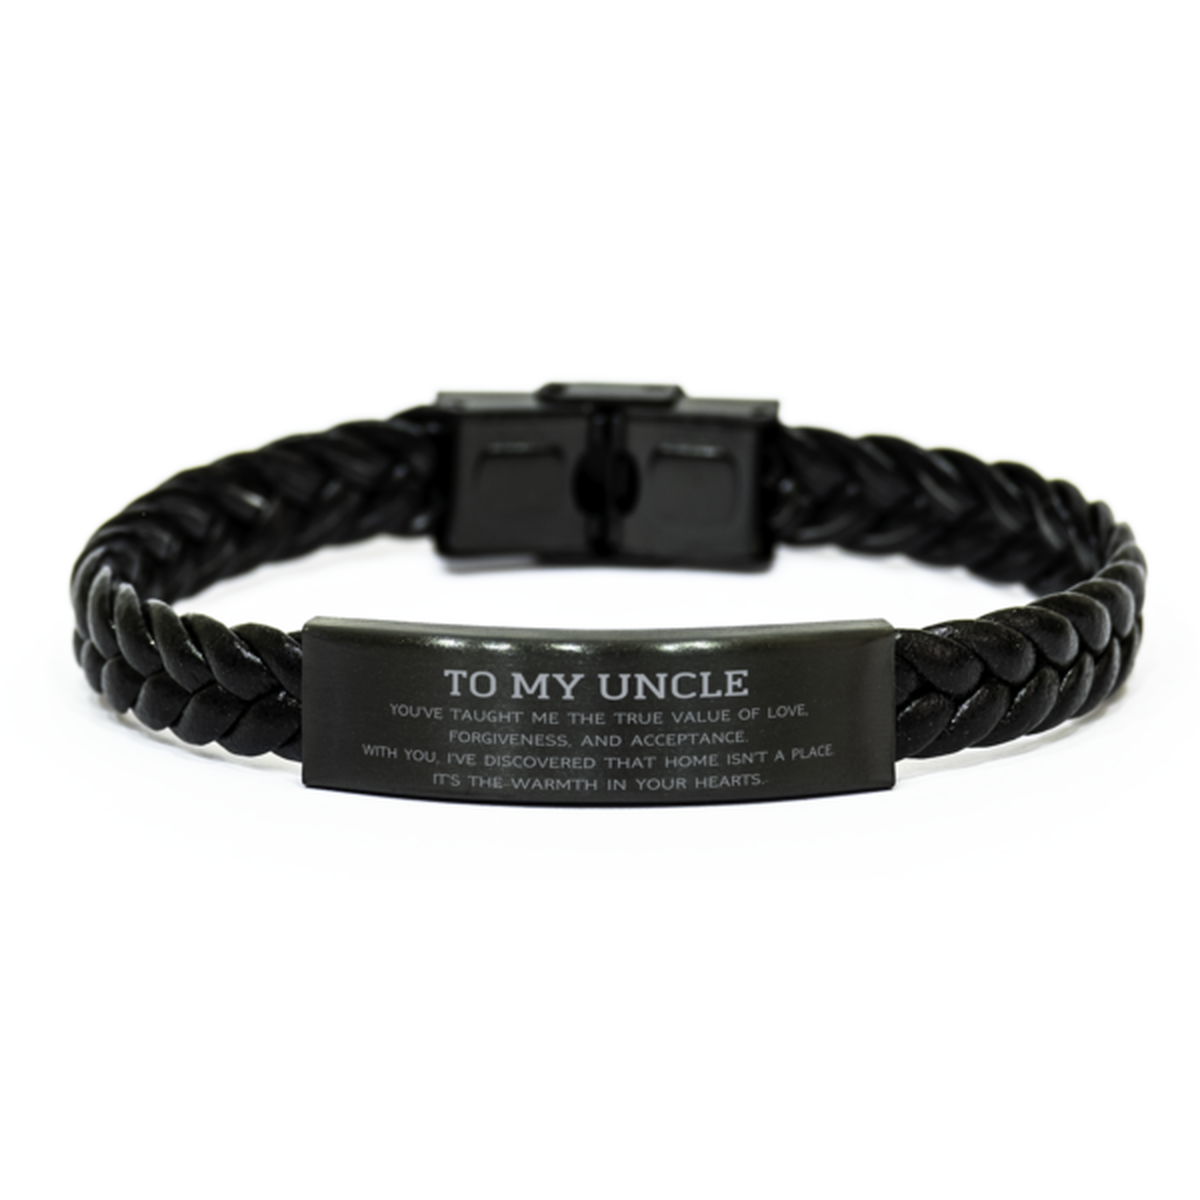 To My Uncle Gifts, You've taught me the true value of love, Thank You Gifts For Uncle, Birthday Braided Leather Bracelet For Uncle